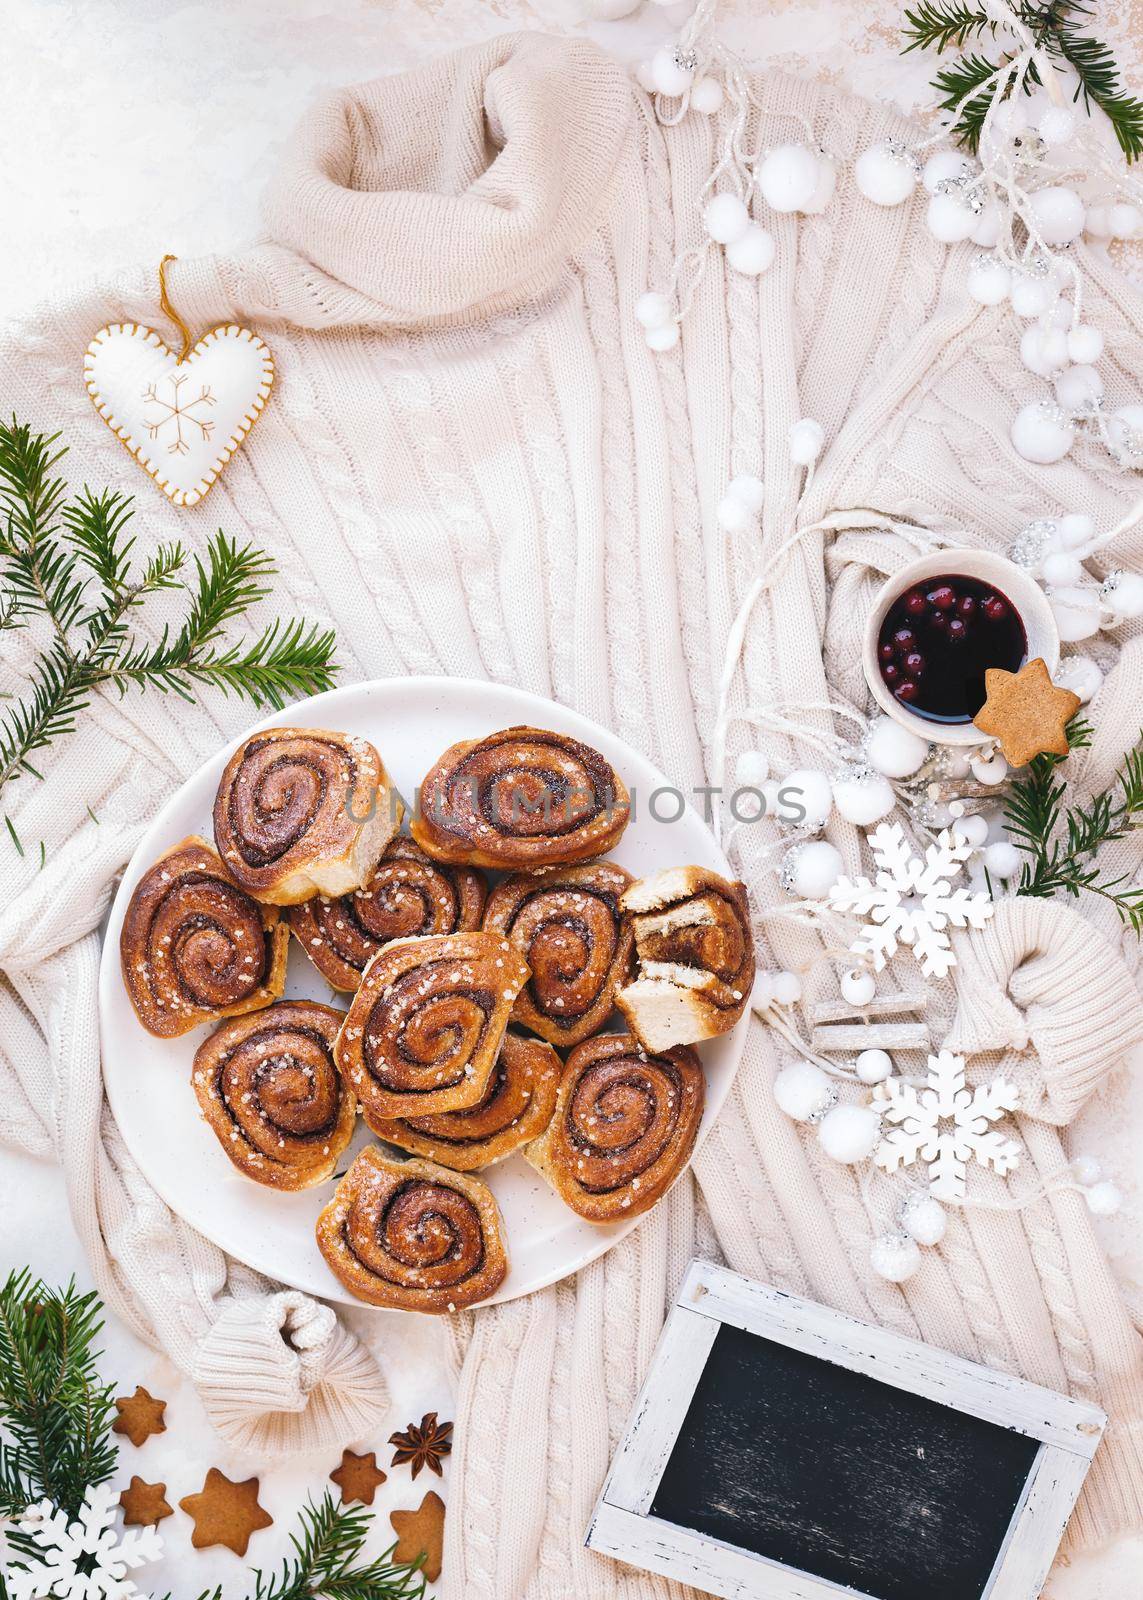 Cozy festive, Christmas, lifestyle concept. Freshly baked cinnamon rolls , knitted woolen light beige sweater and Christmas decorations . Top view,  copy space by Slast20